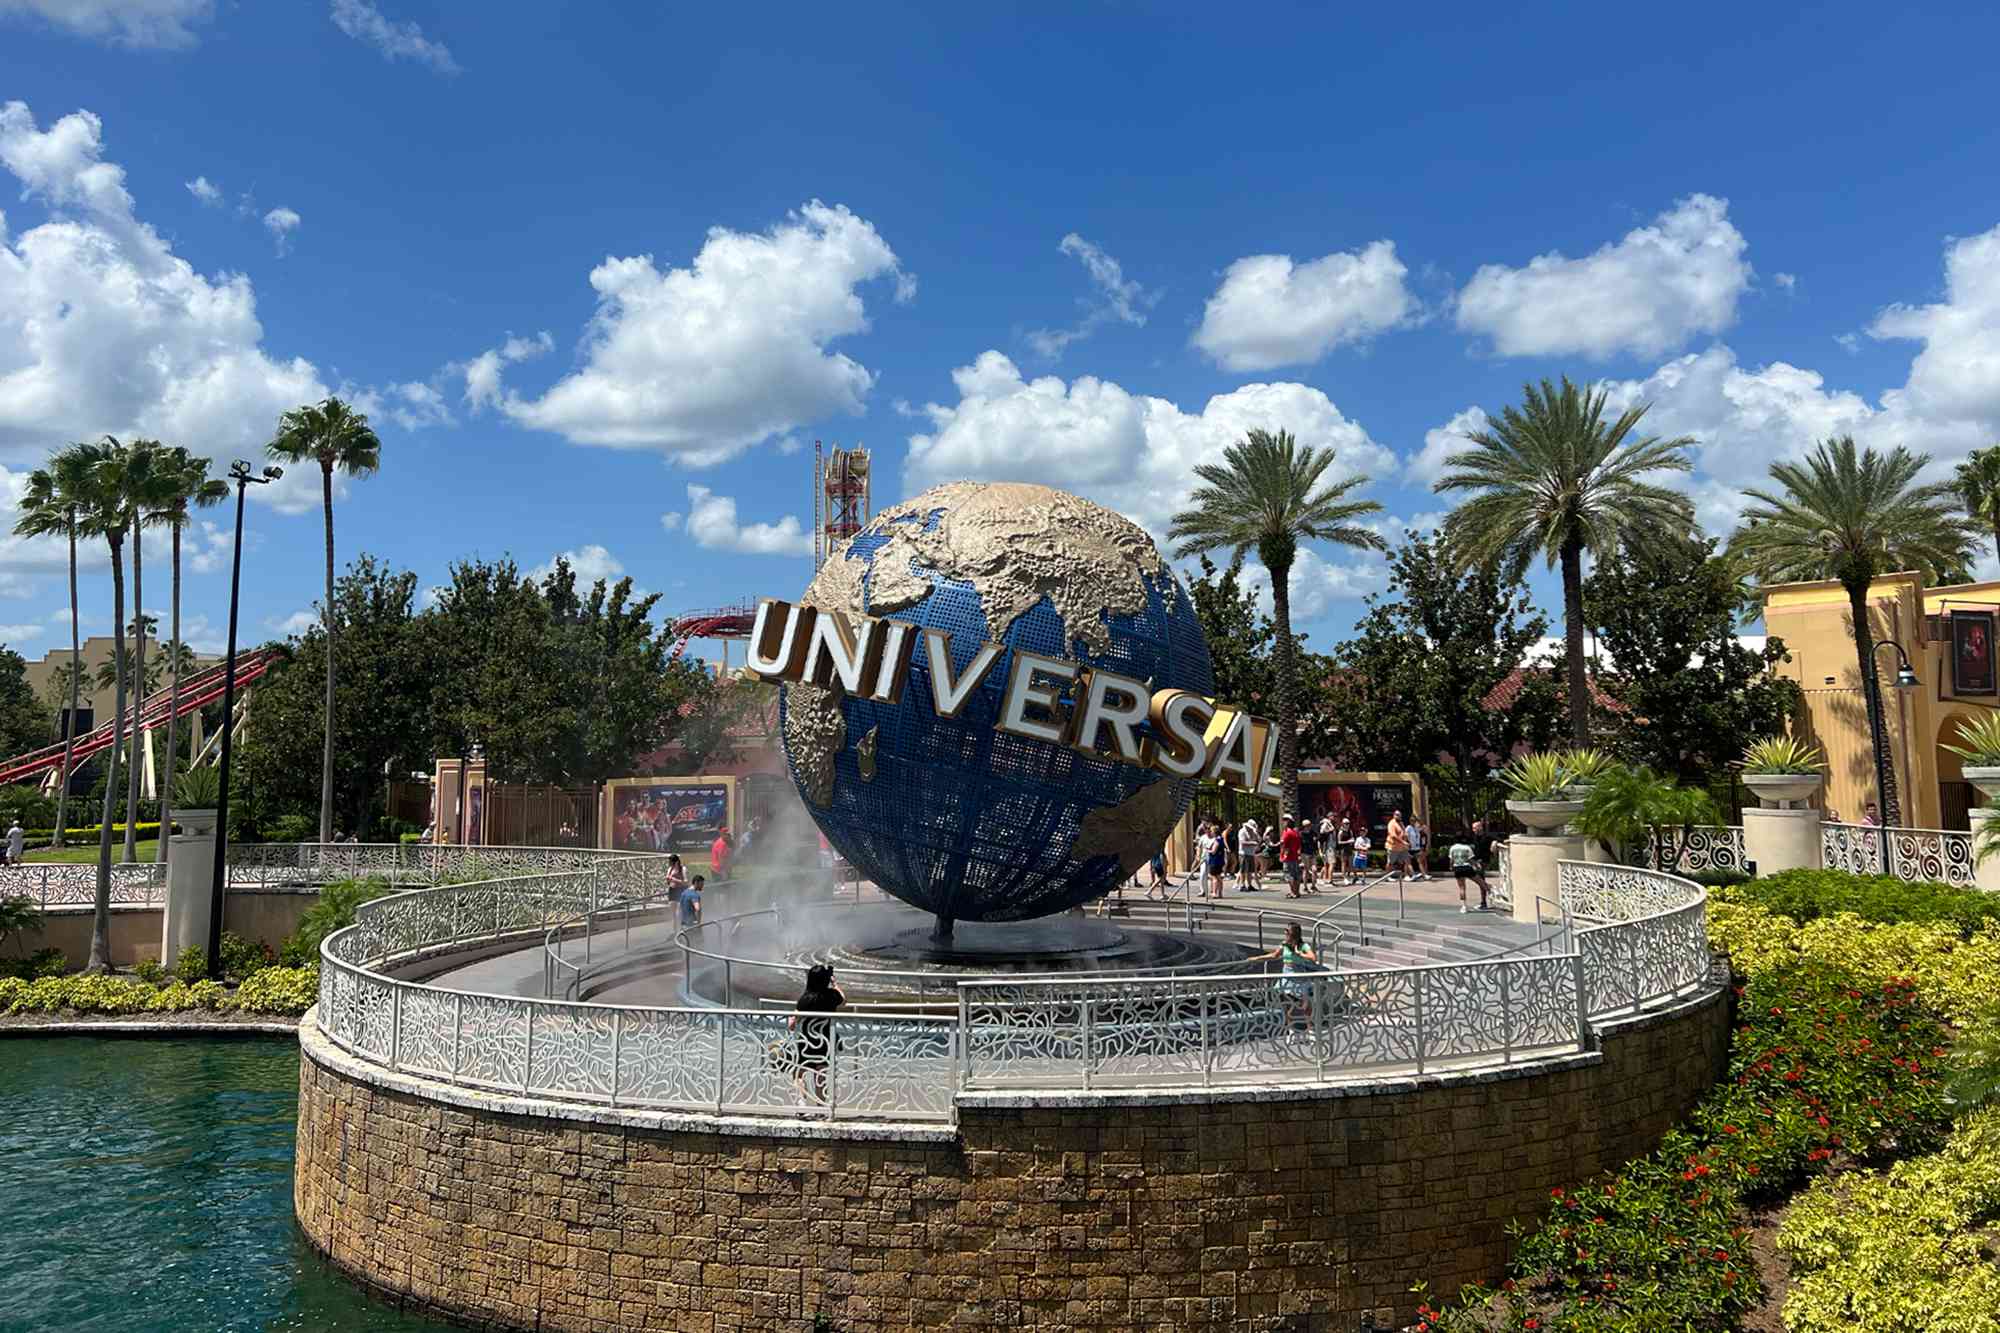 Enjoy 5 Days at Universal Orlando for the Price of 3 With the Park's Latest Ticket Offer